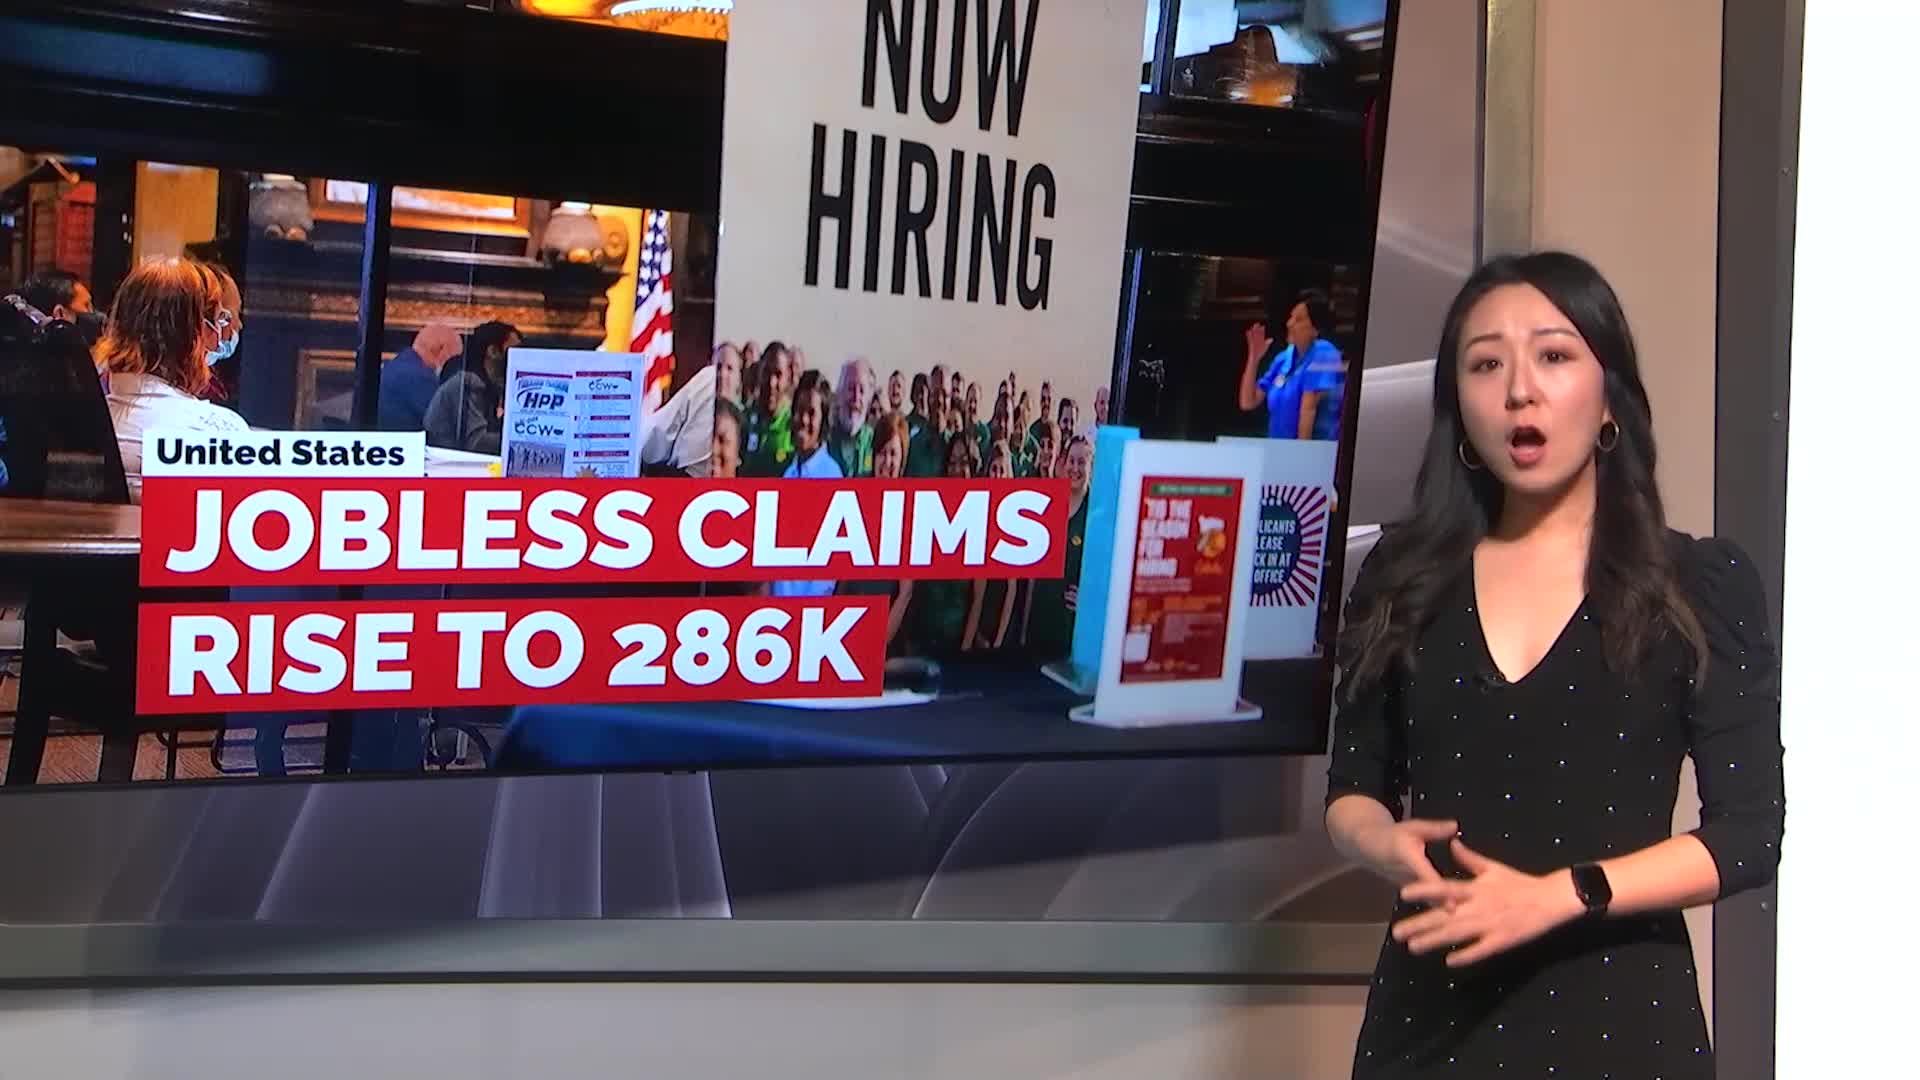 7@7PM National Jobless Claims Spike